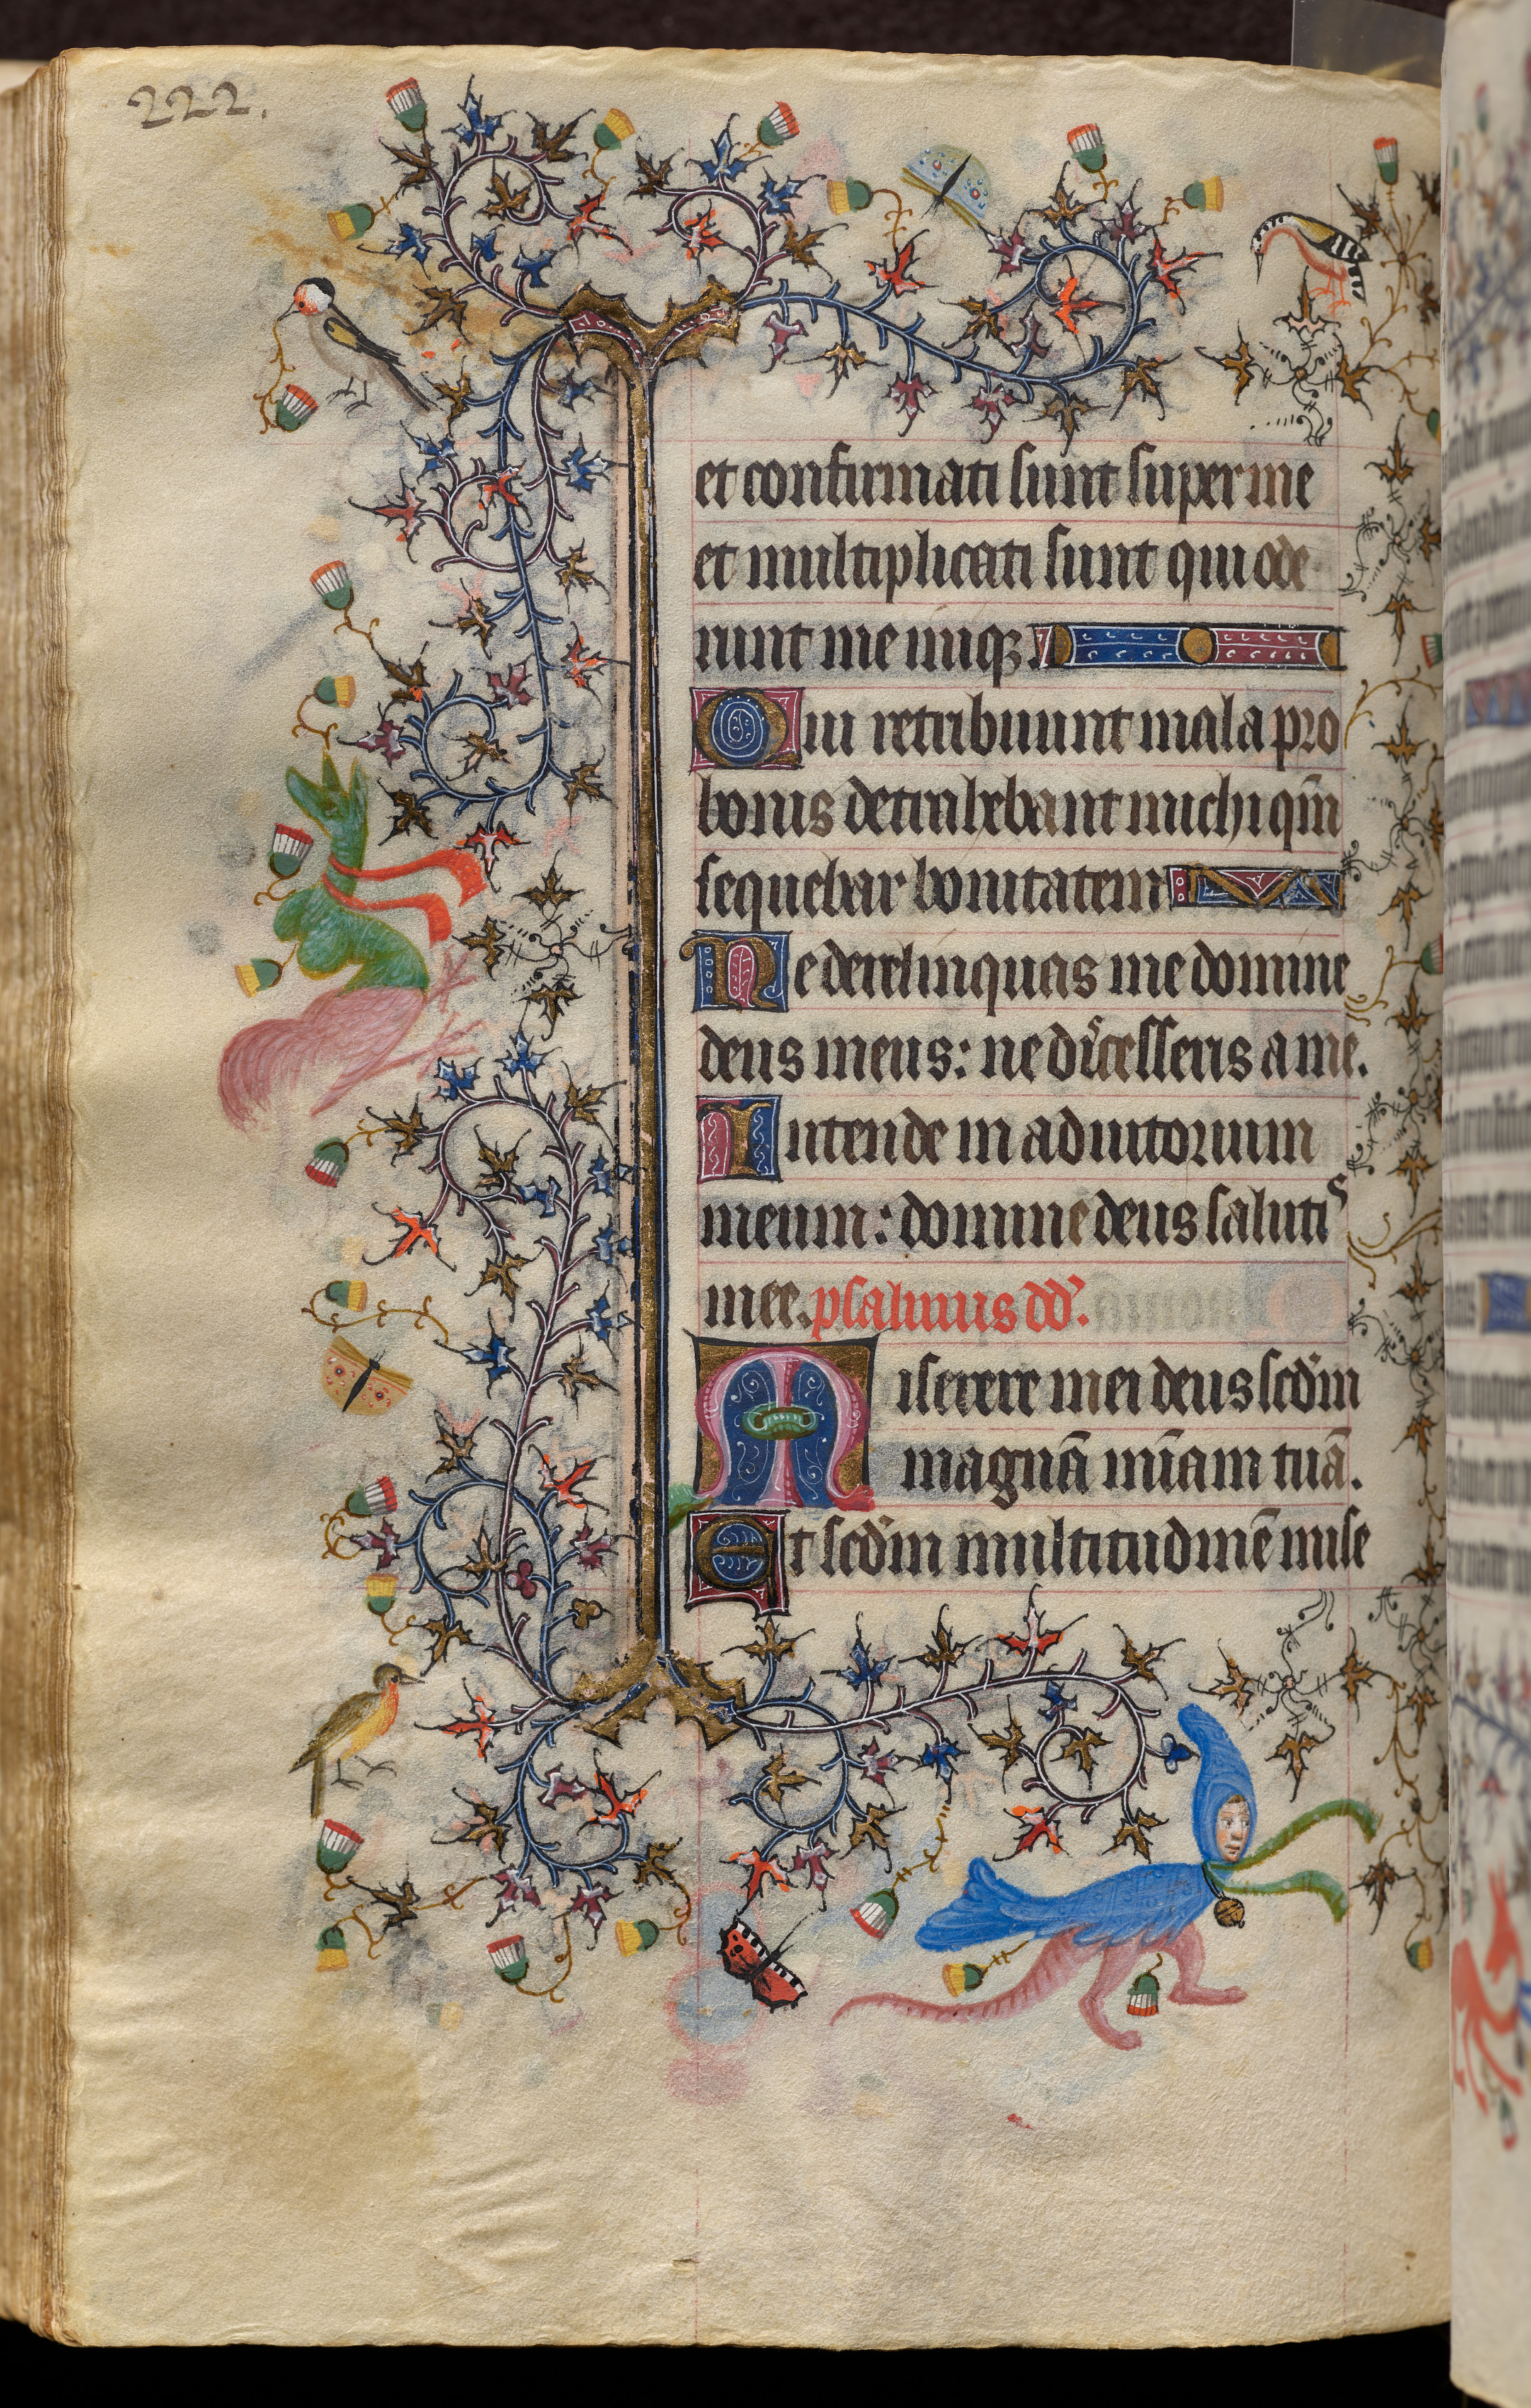 Hours of Charles the Noble, King of Navarre (1361-1425): fol. 111v, Text